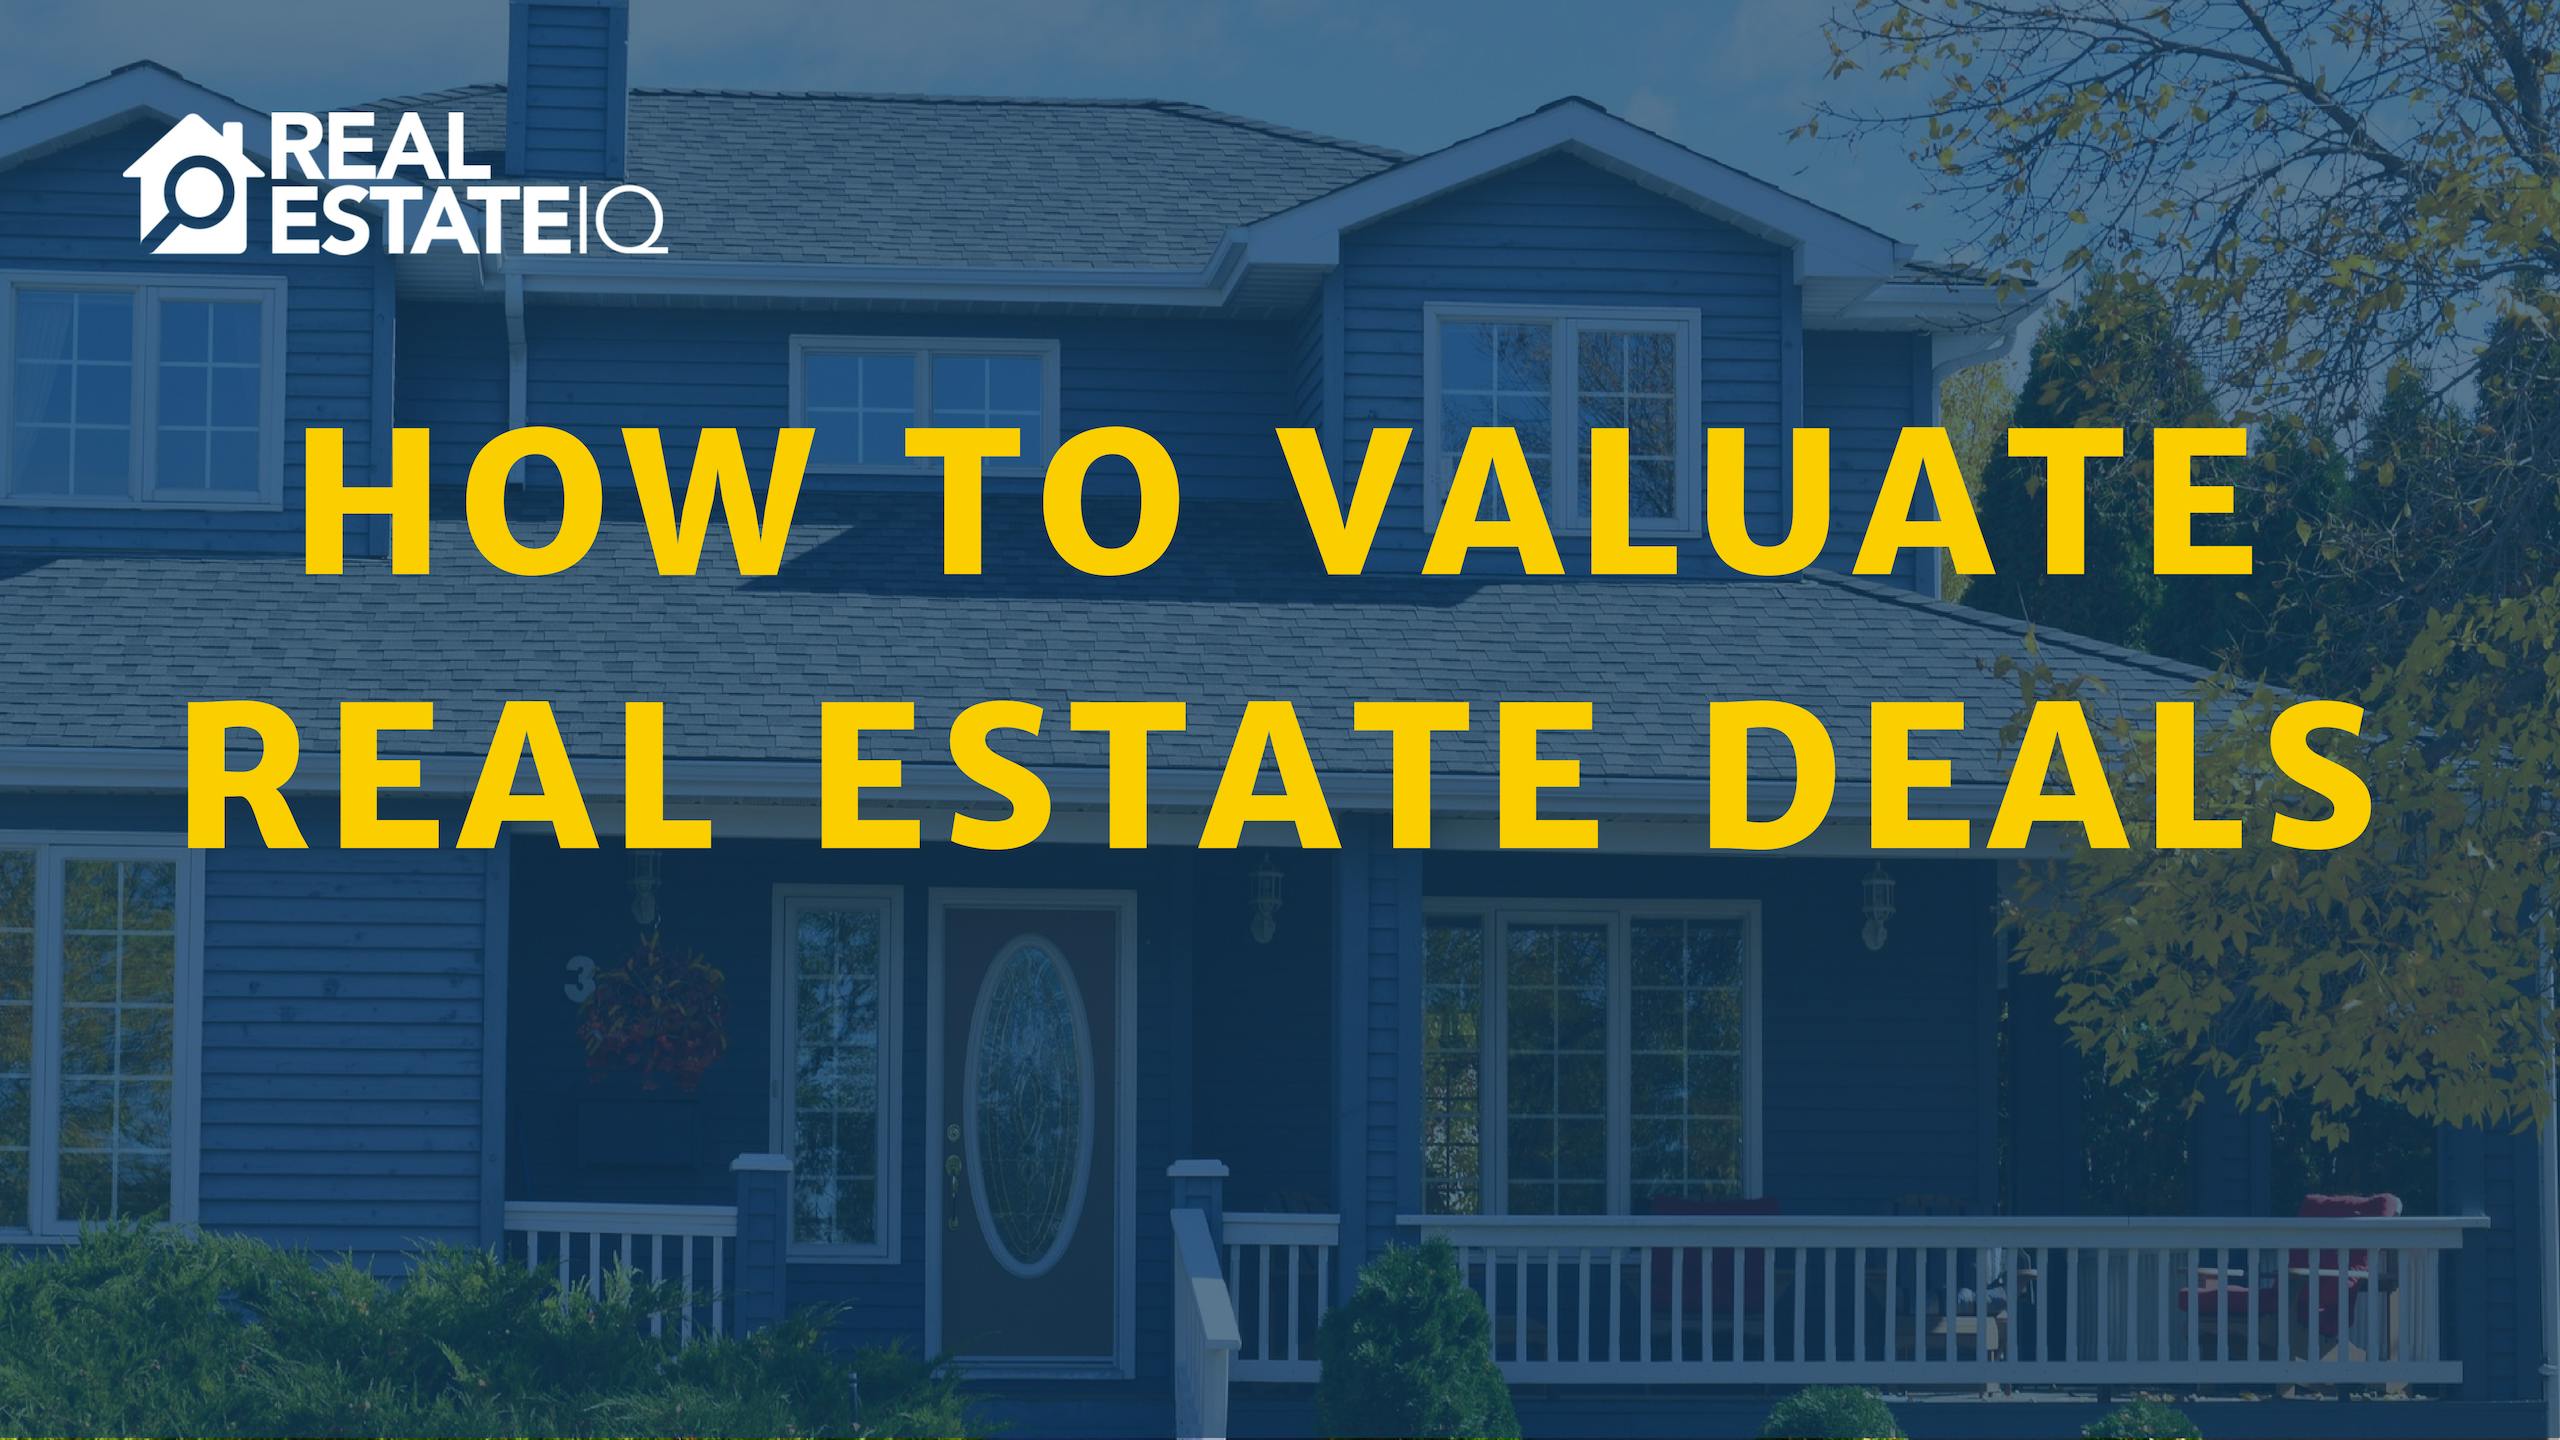 How to Valuate Real Estate Deals